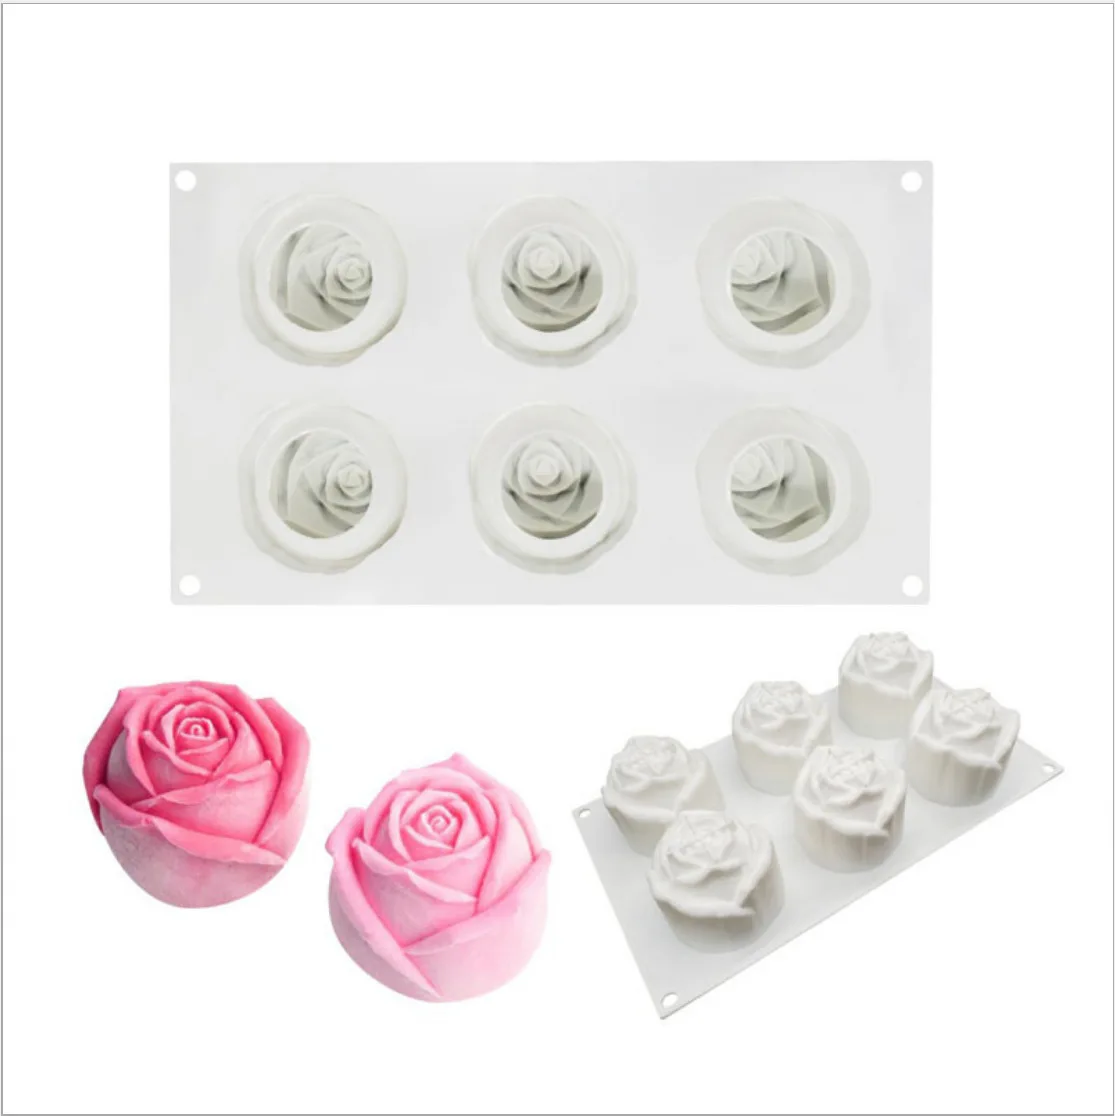 2 Sets 6 Cavity Silicone Mixed Flower Soap Cake Mold Mould For DIY USA